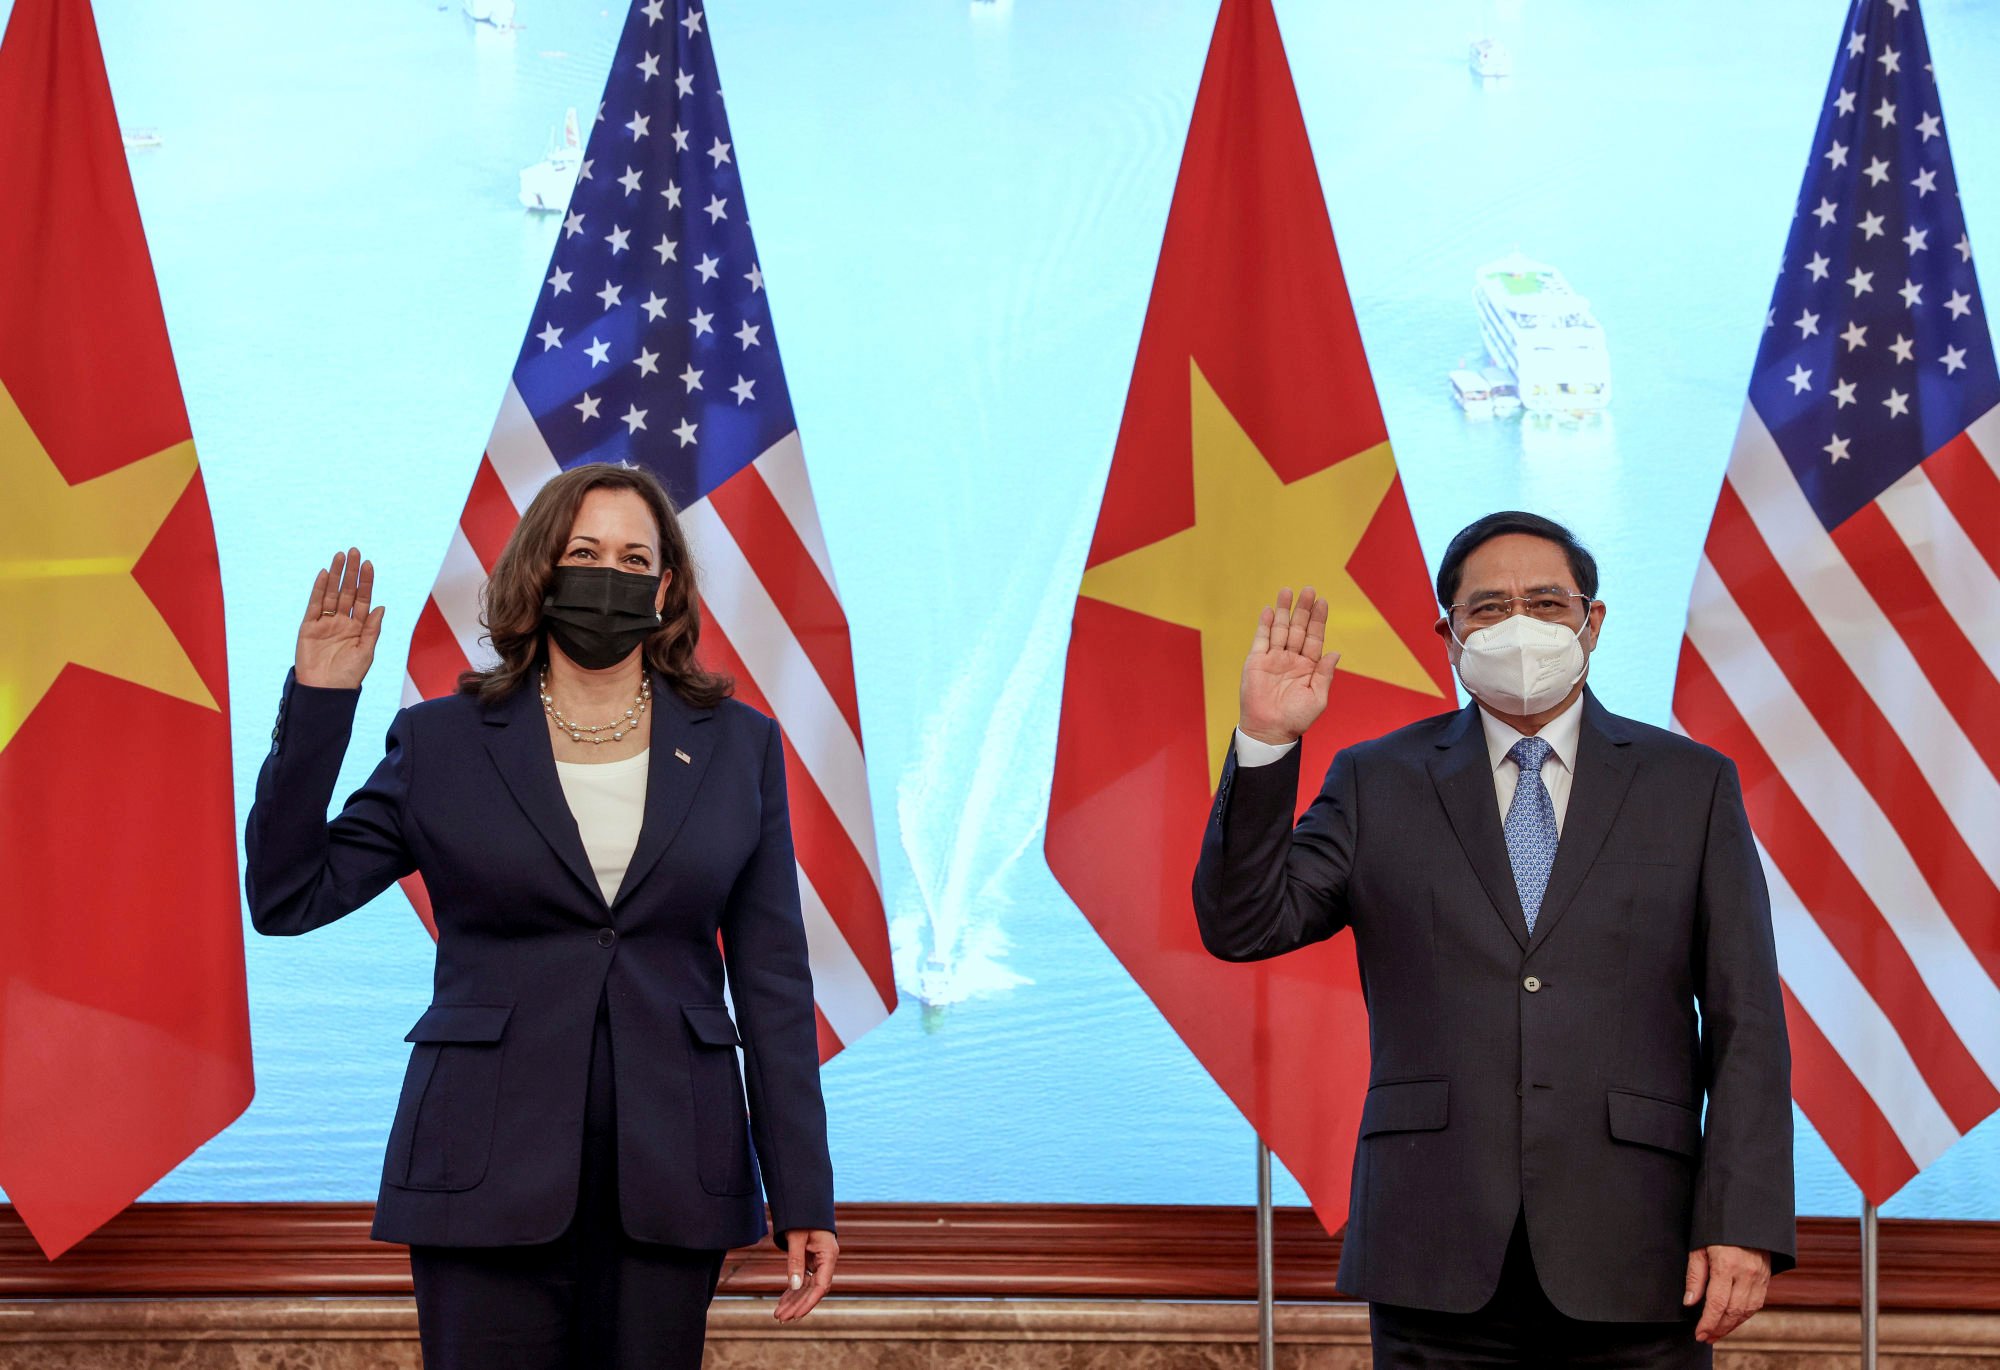 US Vice-President Kamala Harris with Vietnamese Prime Minister Pham Minh Chinh in Hanoi last year. Hanoi’s warming ties with Washington were reflected in its downgrading in the US report. Photo: AP